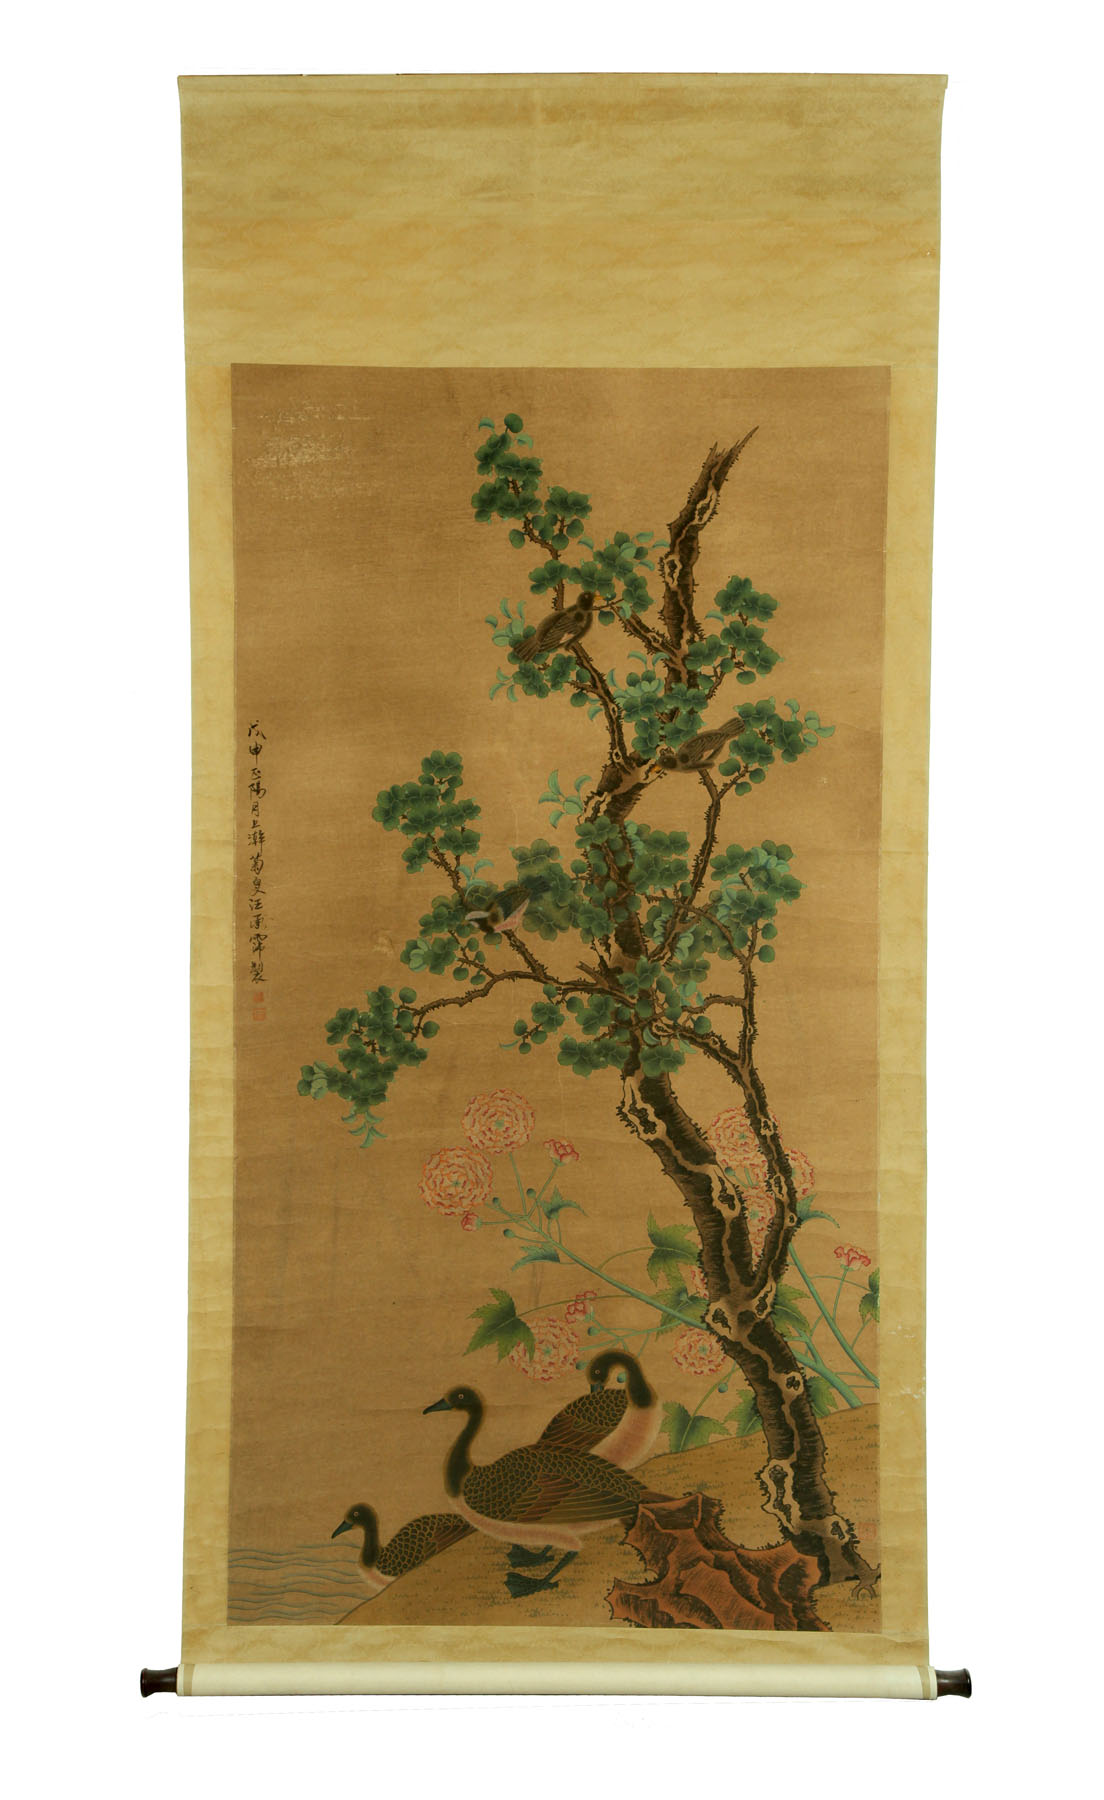 SCROLL ATTRIBUTED TO WANG CHEN